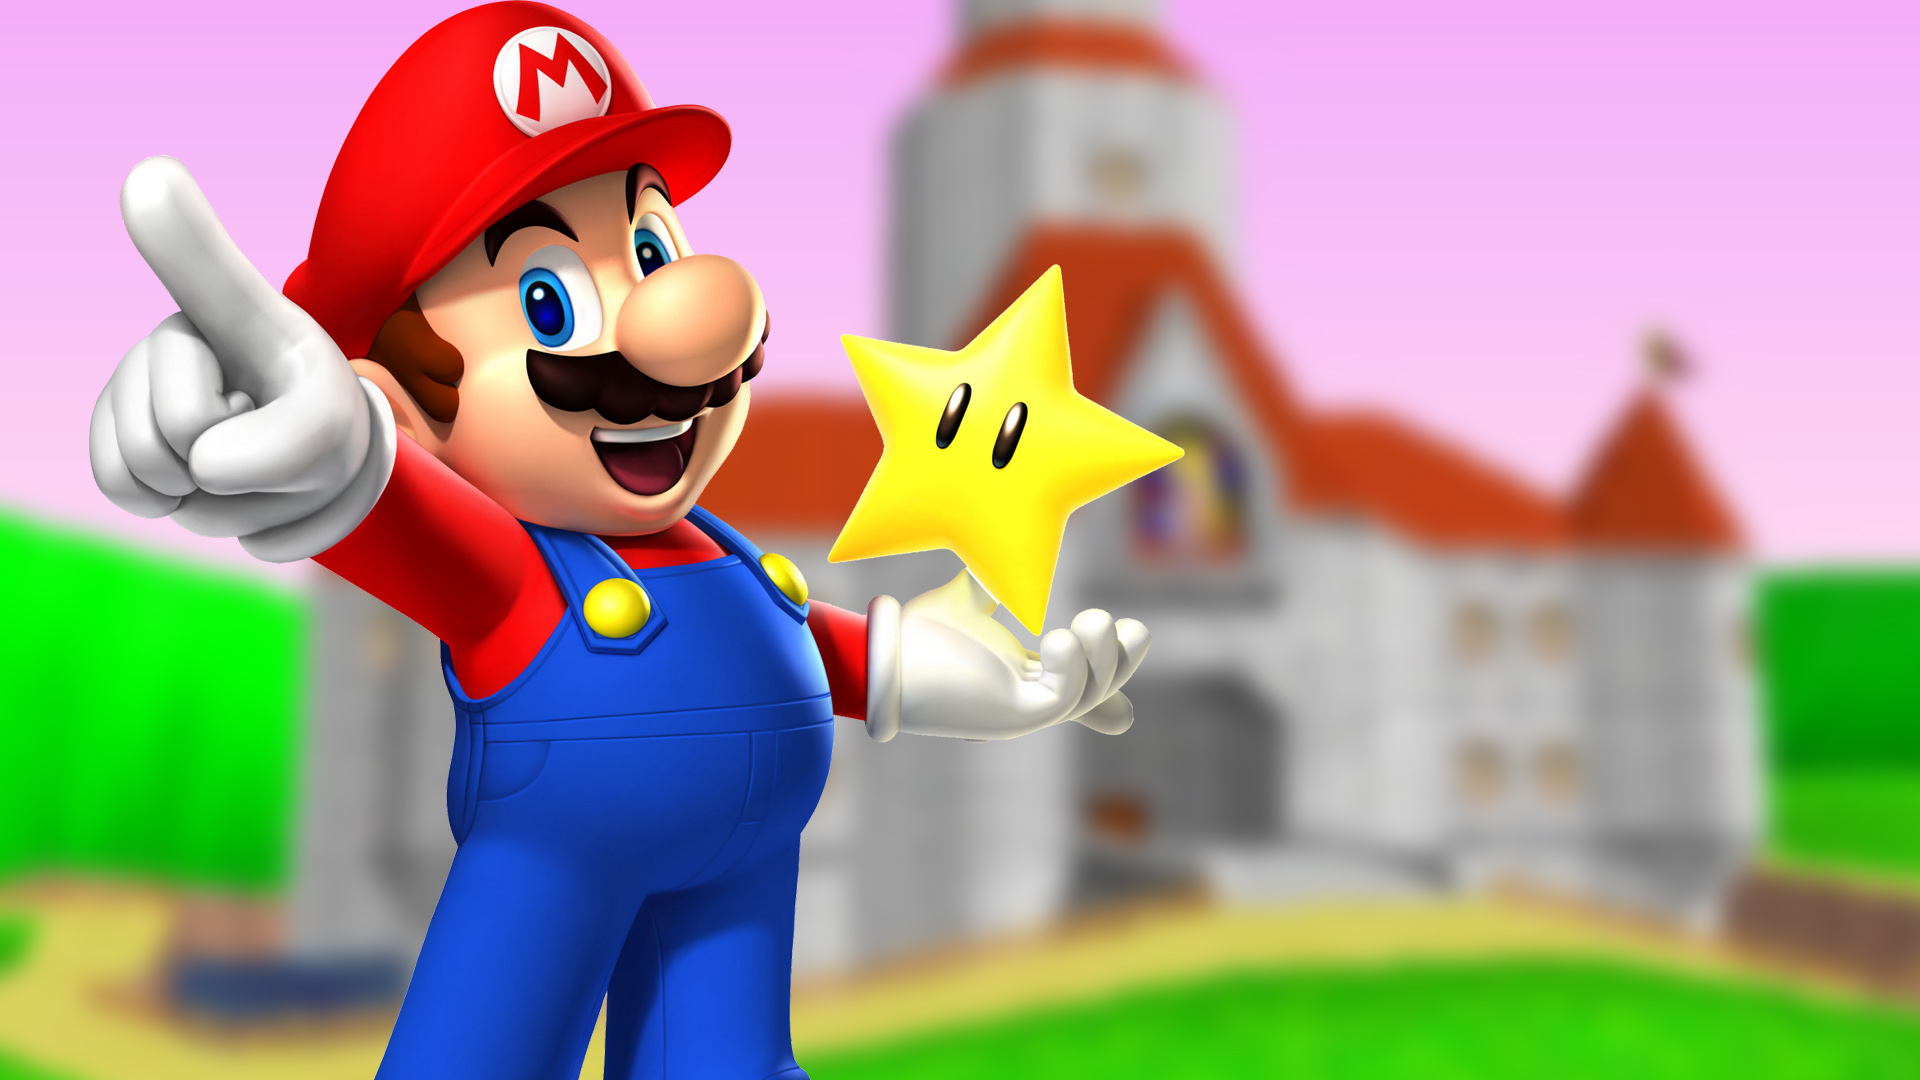 Top 10 best Mario games of all time, ranked